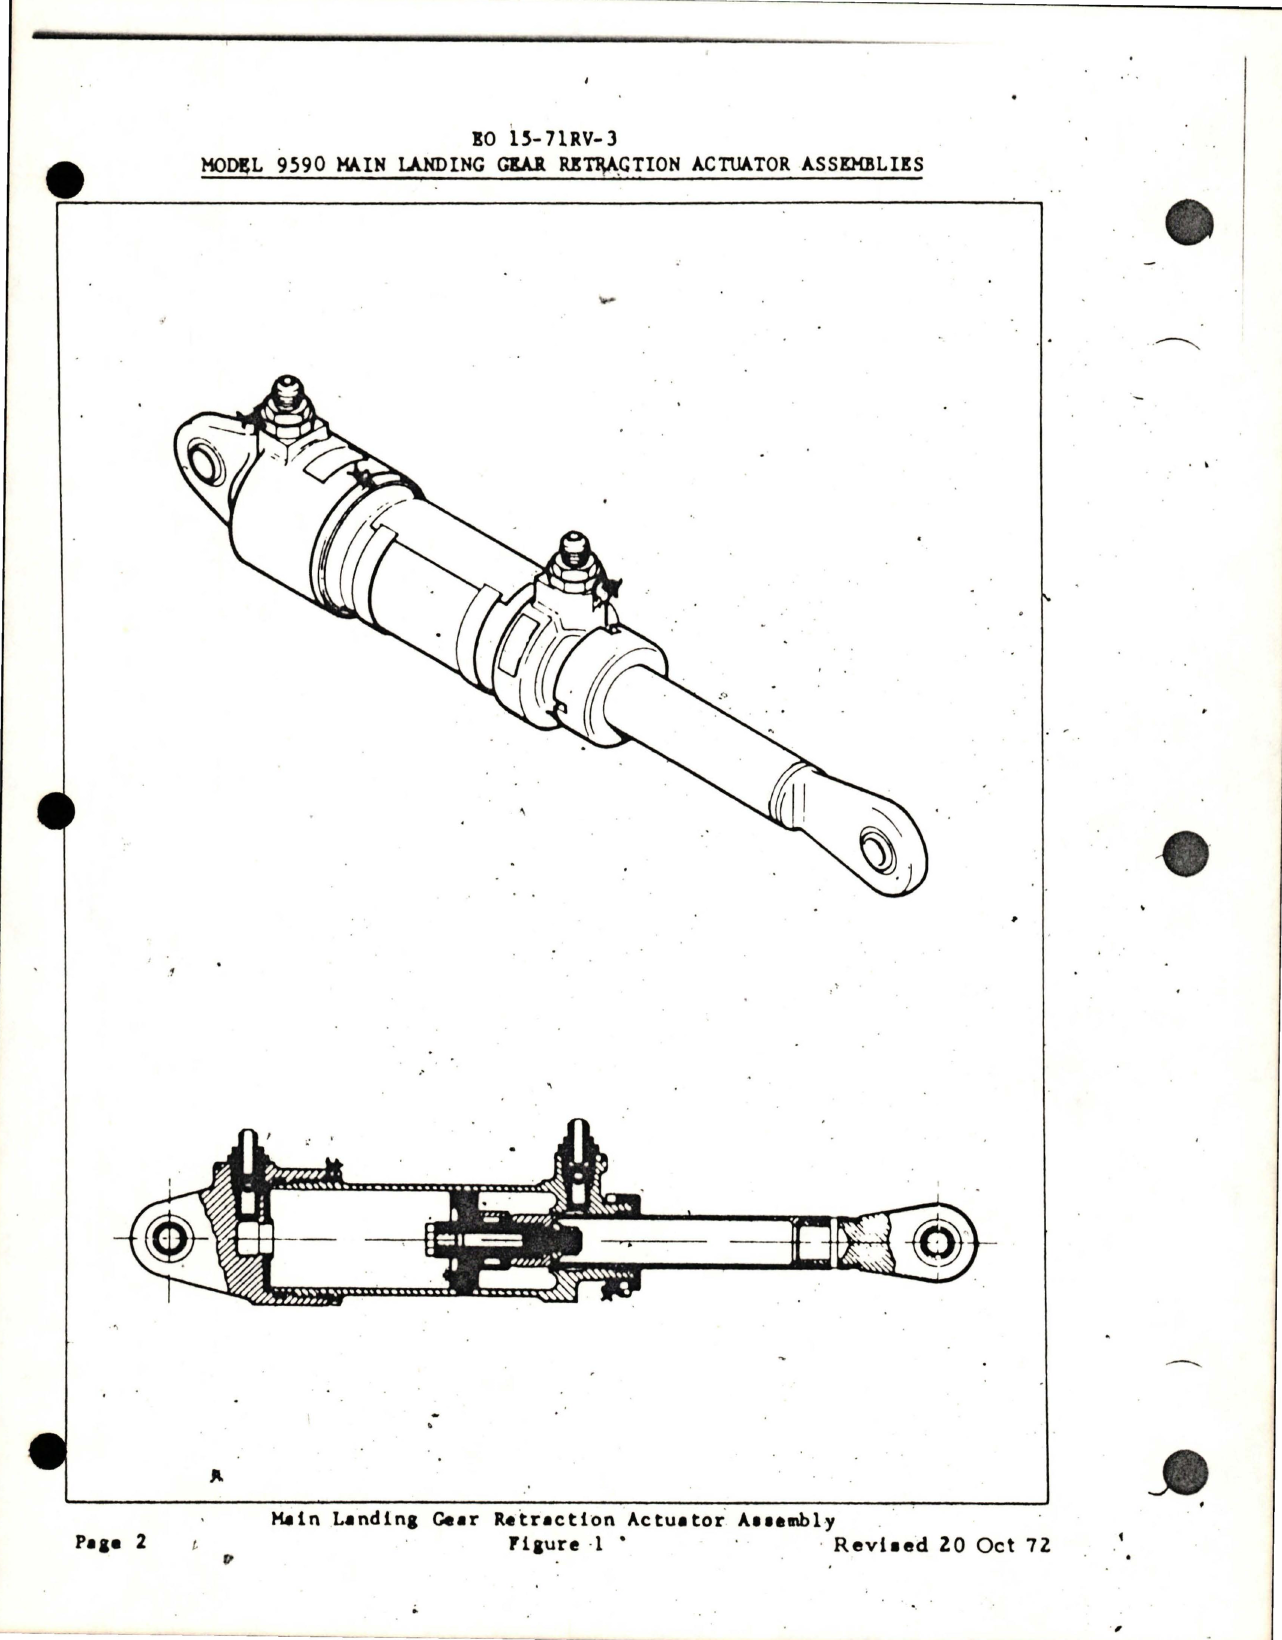 Sample page 5 from AirCorps Library document: Handbook with Parts List for Main Landing Gear Retraction Actuator Assemblies - Parts 9590-1 and 9590-3